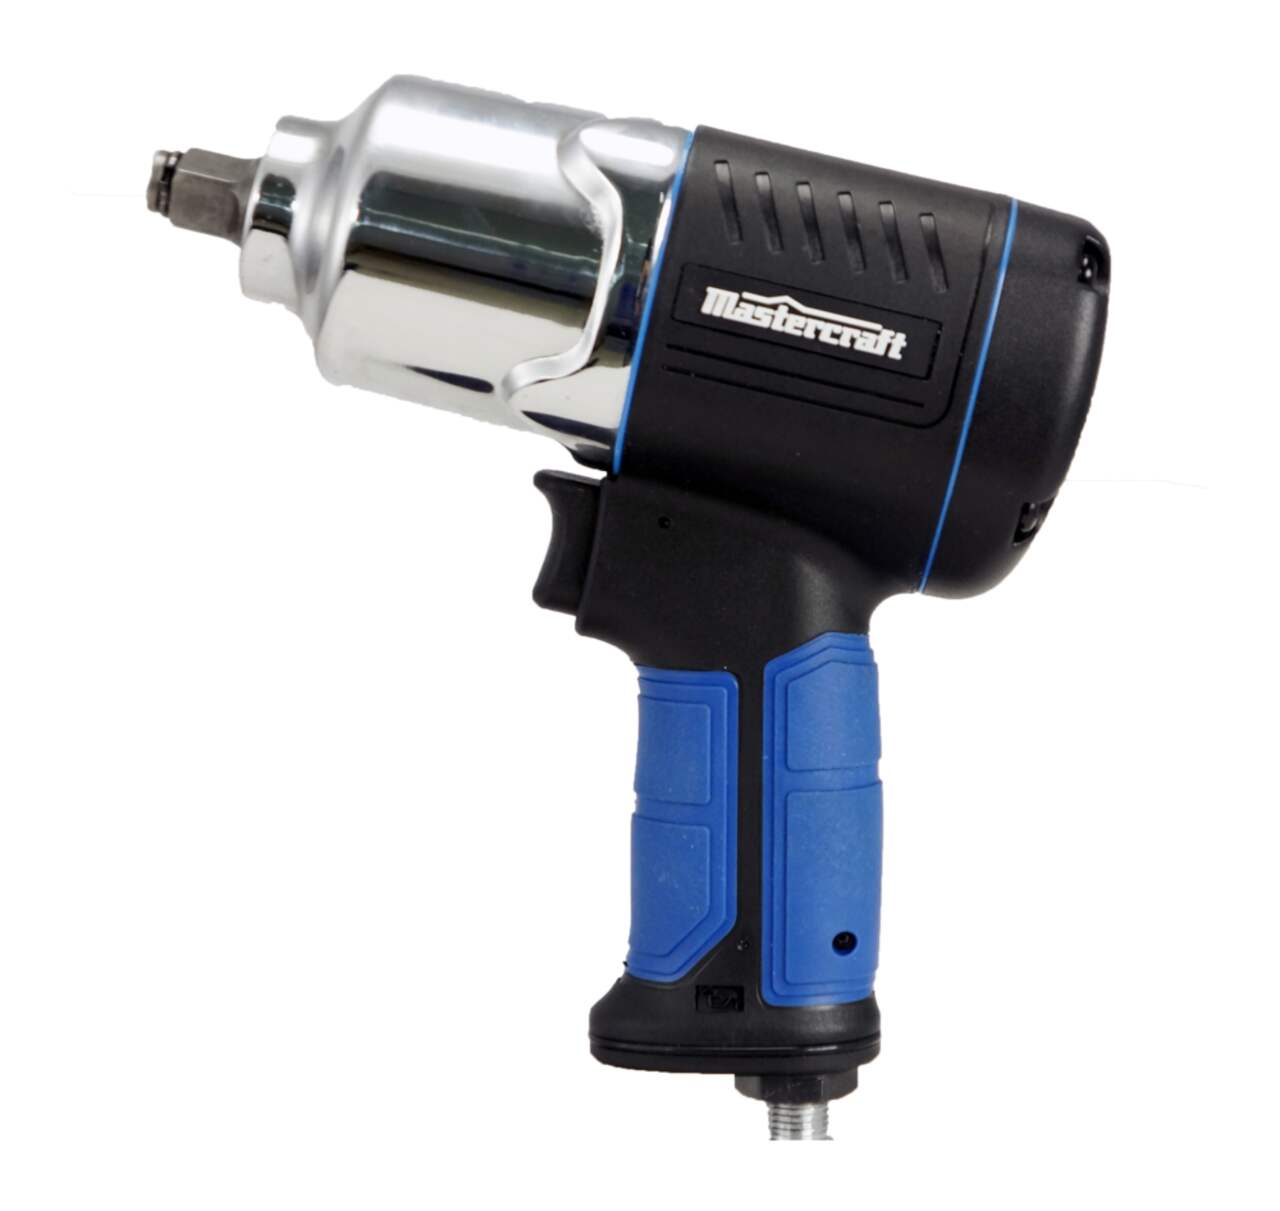 Mastercraft Compact 1/2-in Pneumatic Air Impact Wrench with